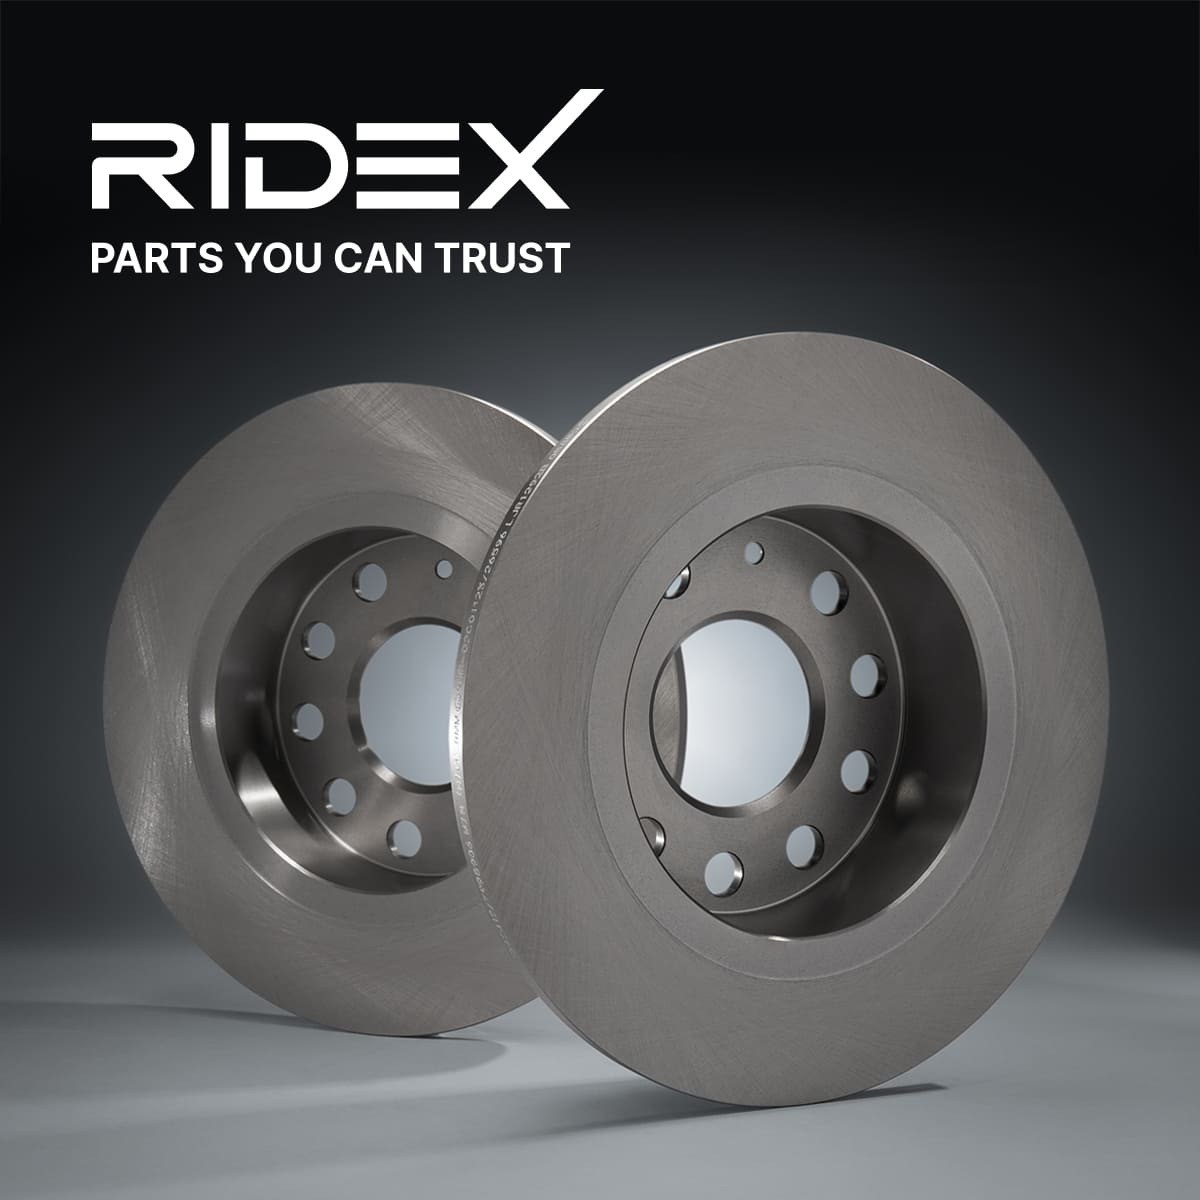 82B0643 Brake discs 82B0643 RIDEX Front Axle, 328,0x28mm, 05/06x120, internally vented, Uncoated